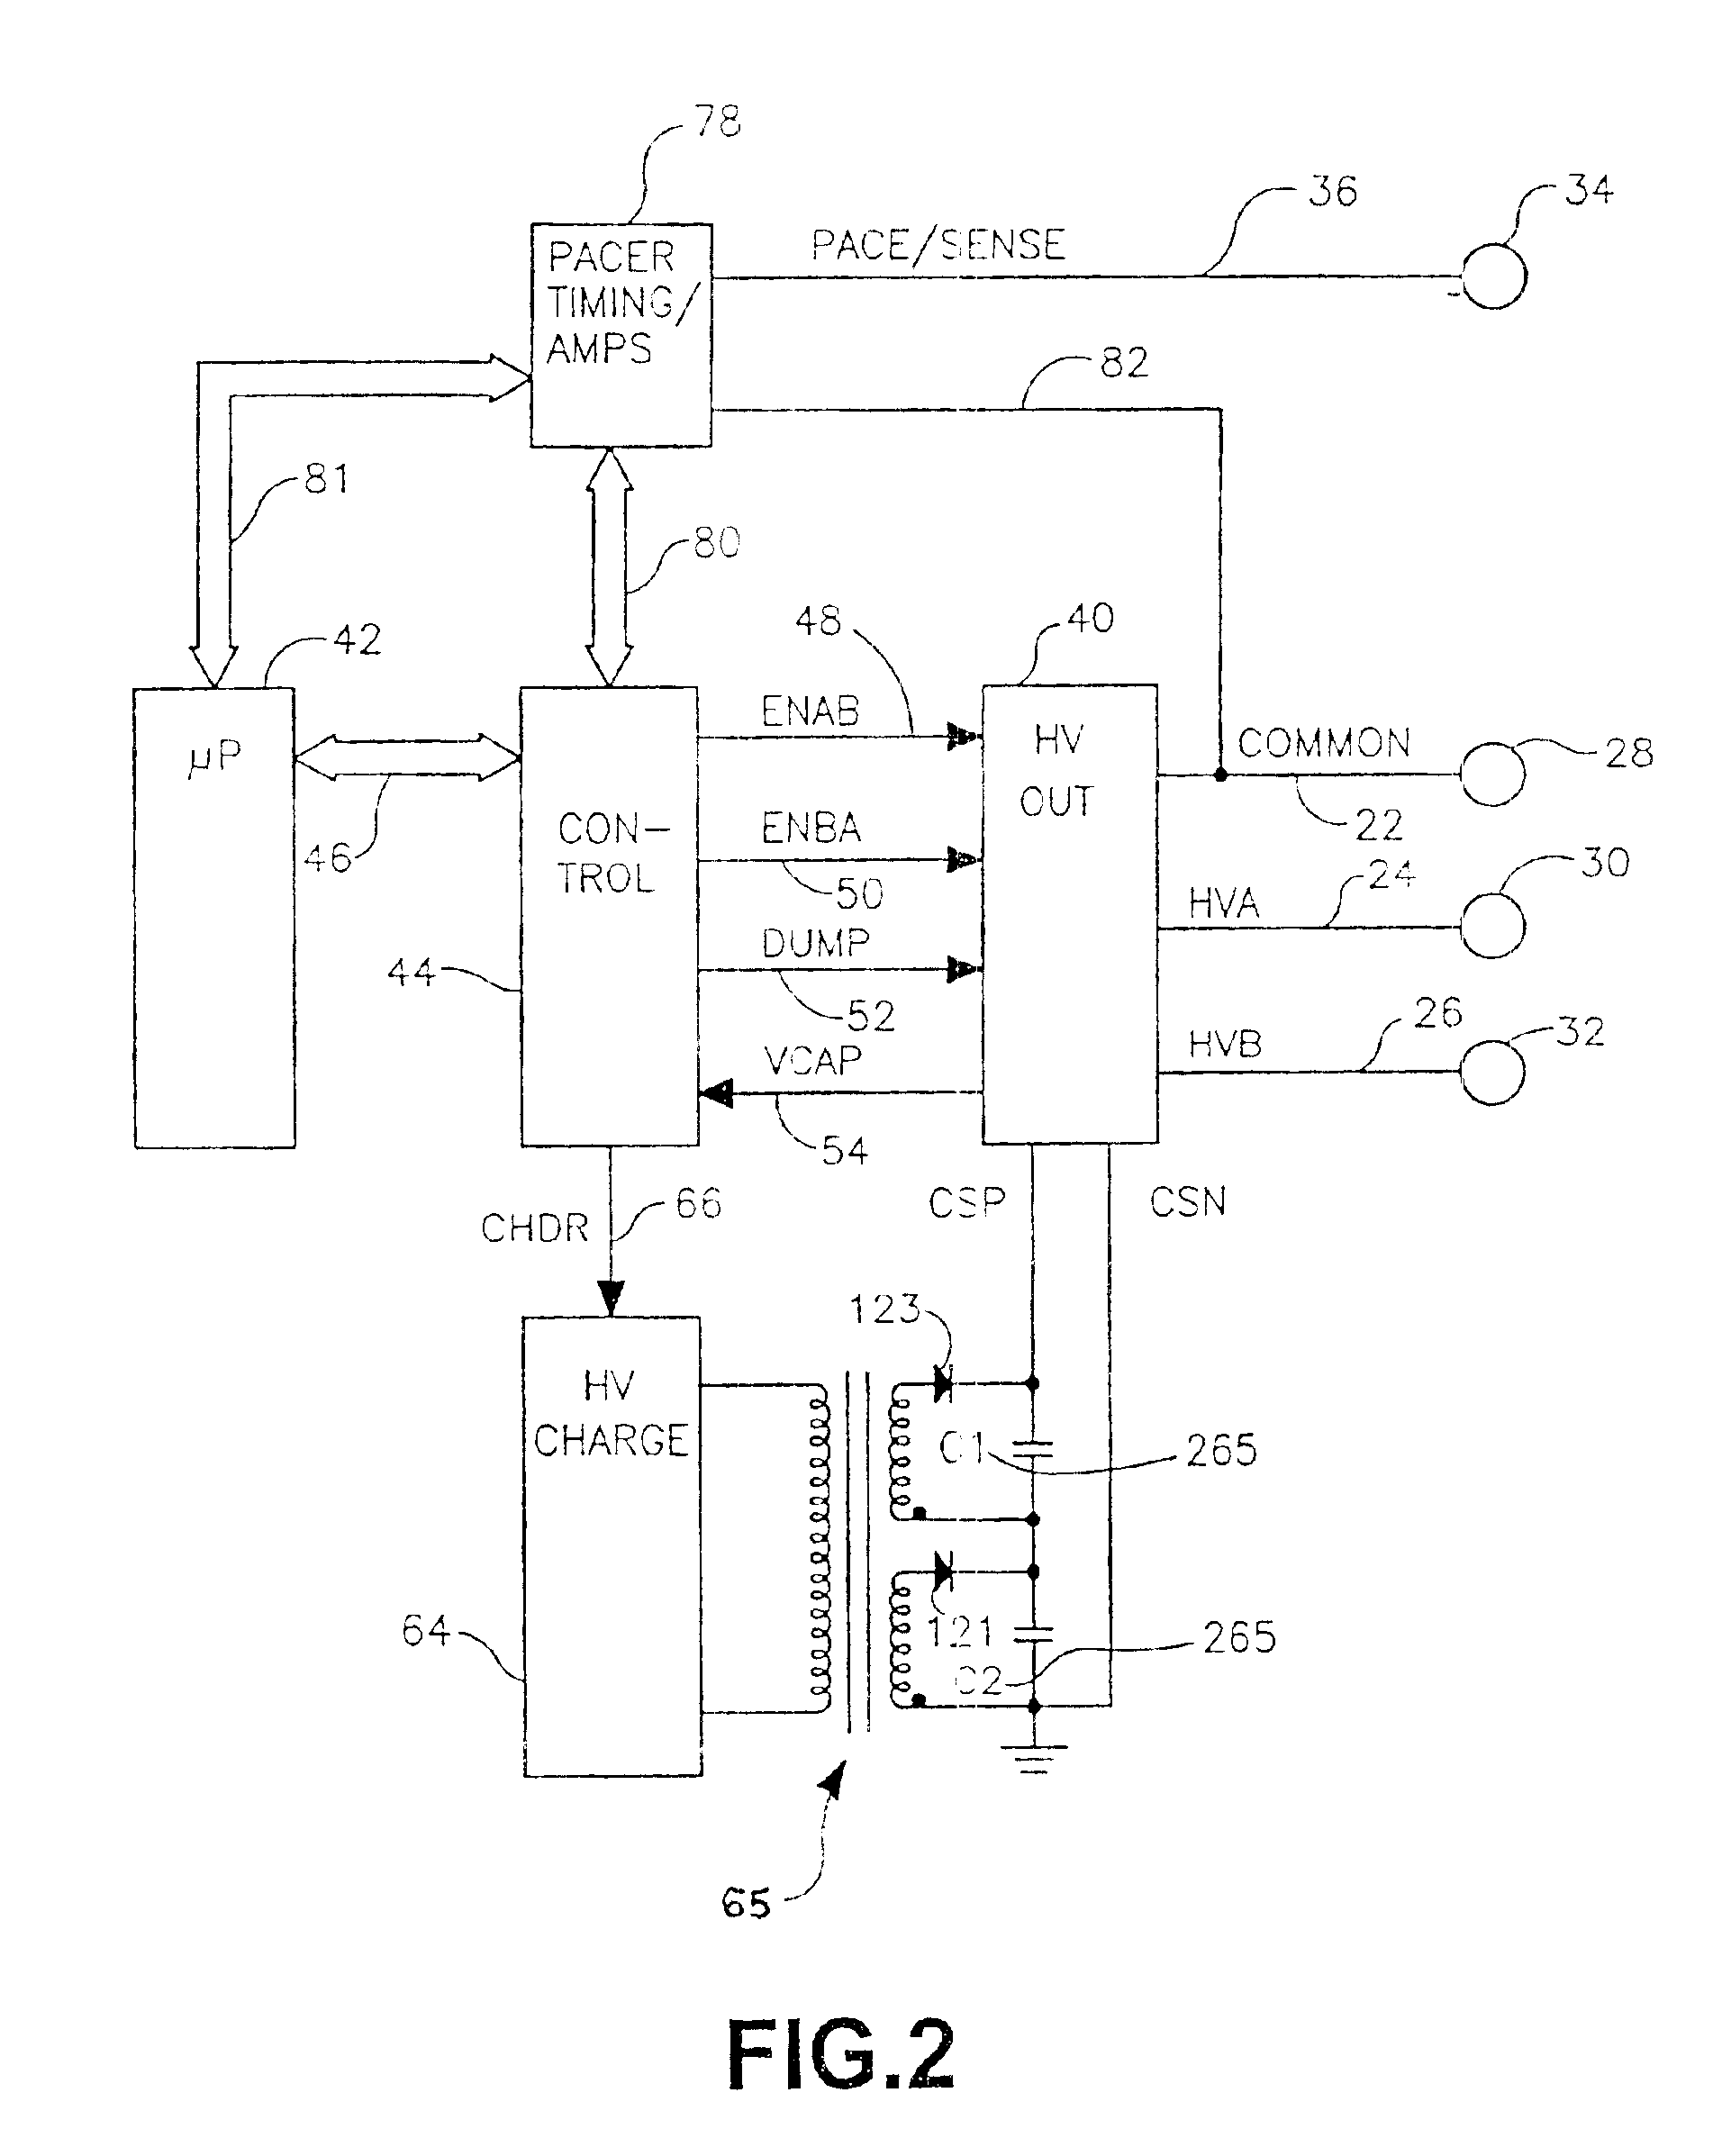 Methods of fabricating anode layers of flat electrolytic capacitors